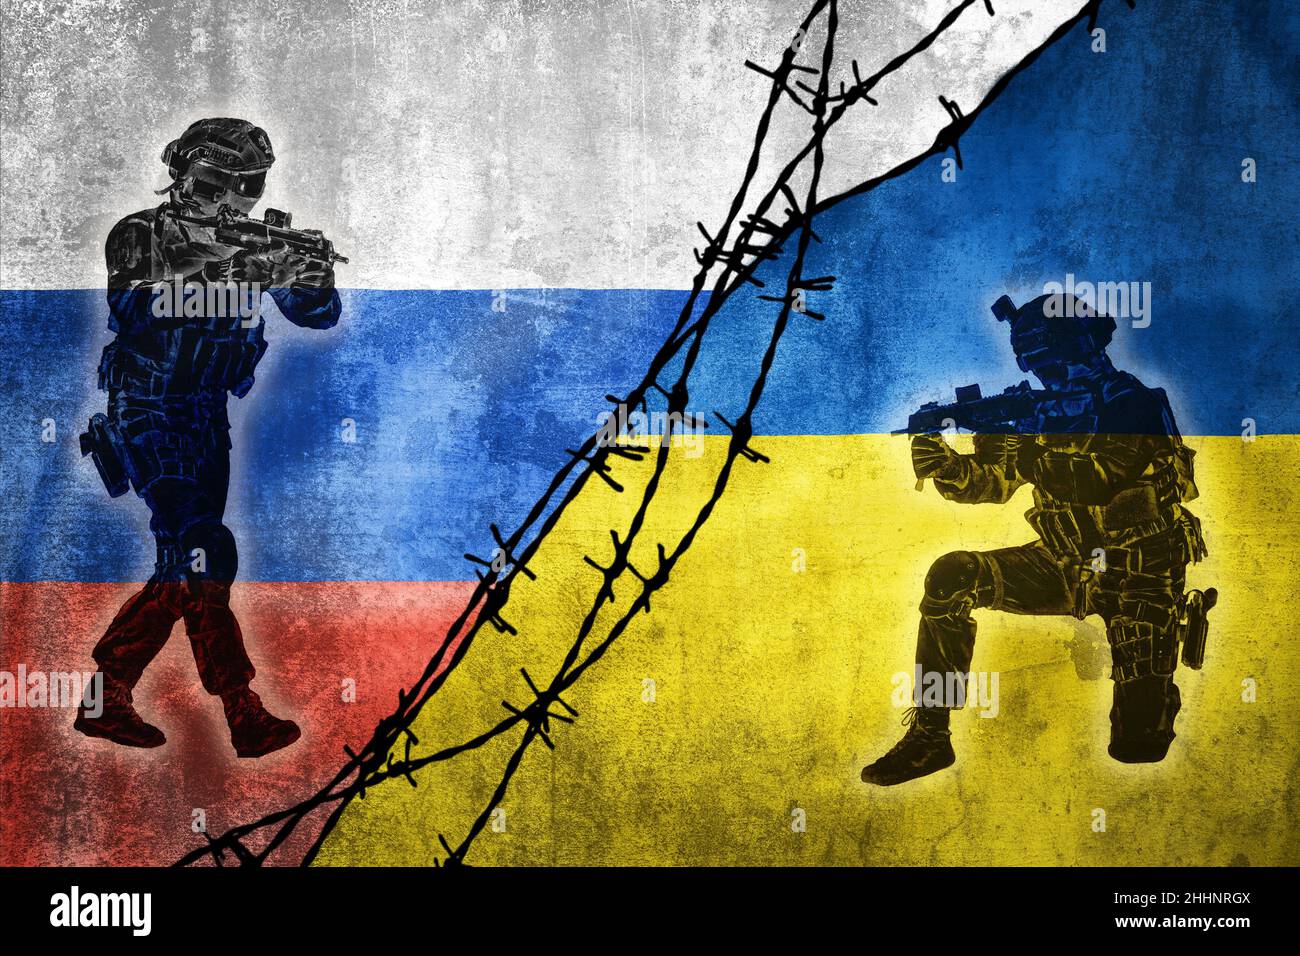 Grunge flags of Russian Federation and Ukraine divided by barb wire with soliders pointing weapon at each other illustration, concept of tense relatio Stock Photo